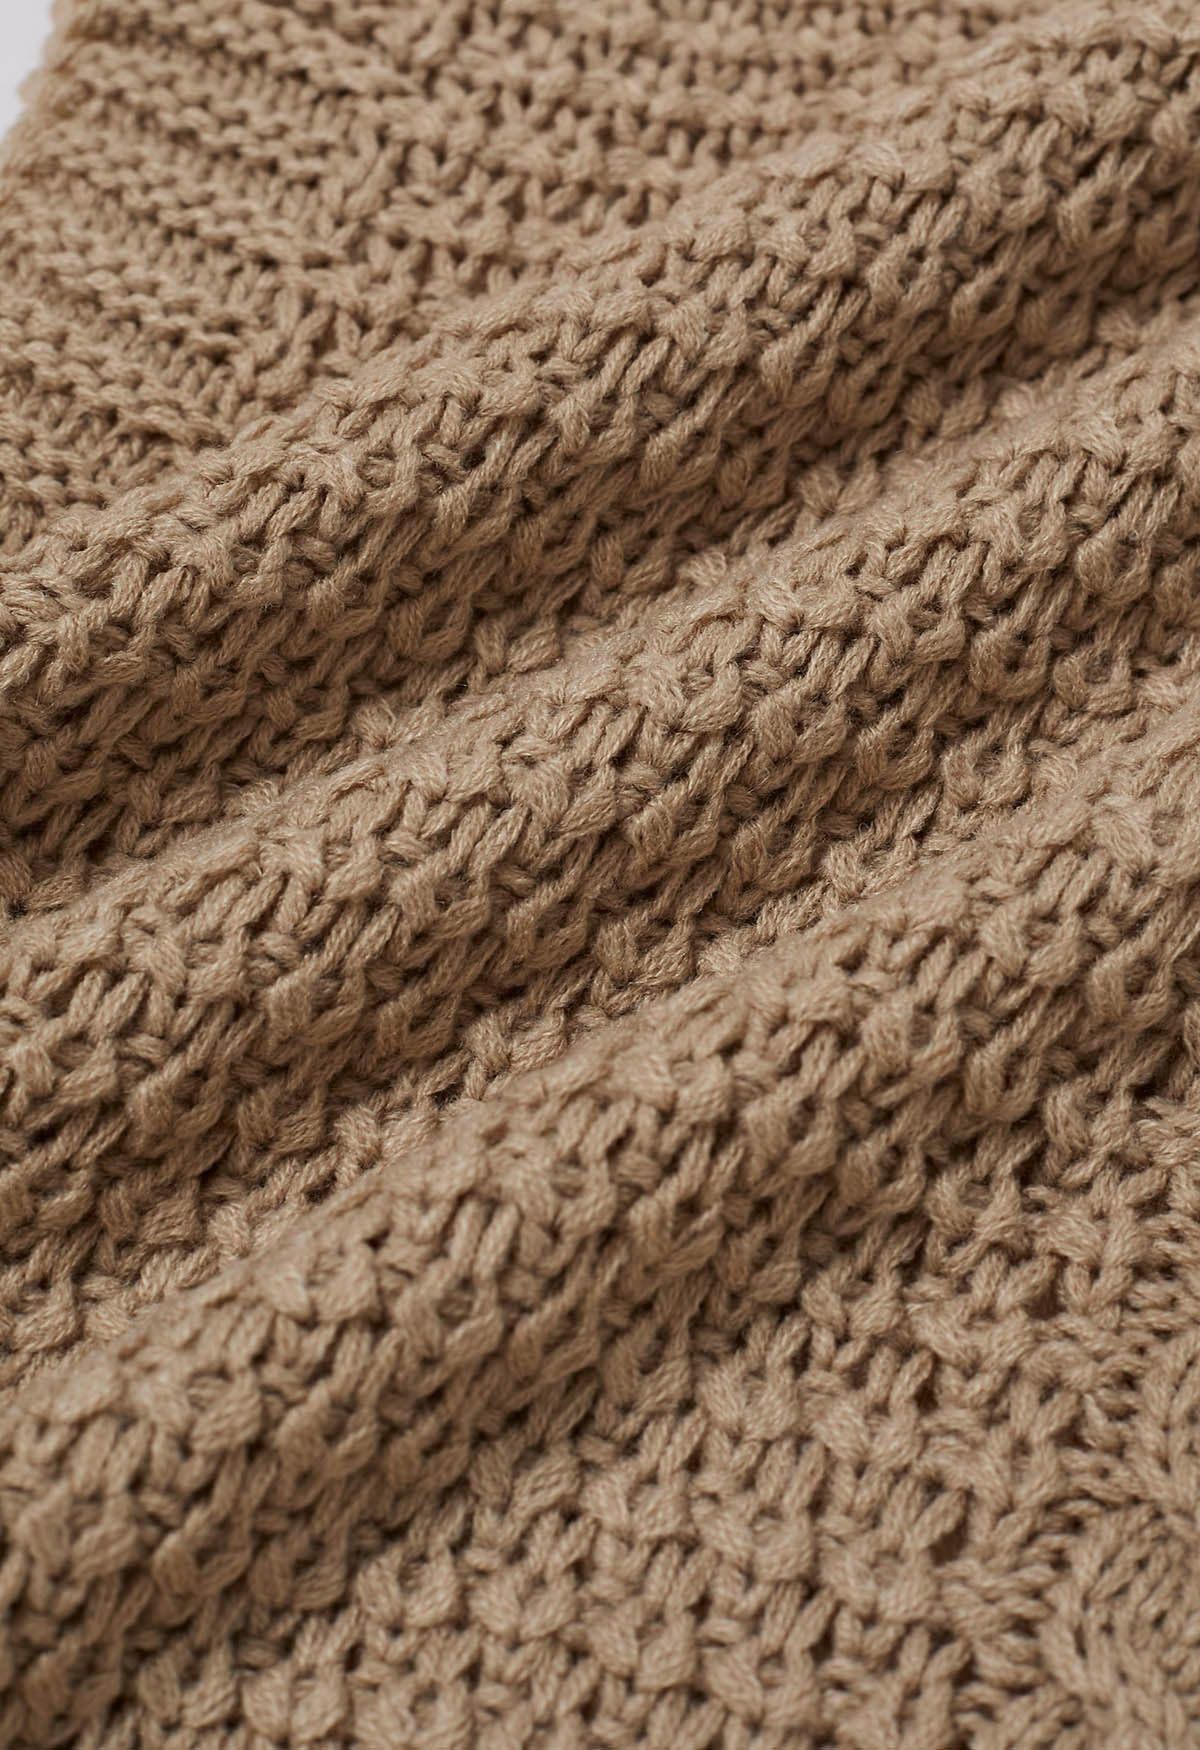 Turtleneck Cable Knit Poncho in Light Tan